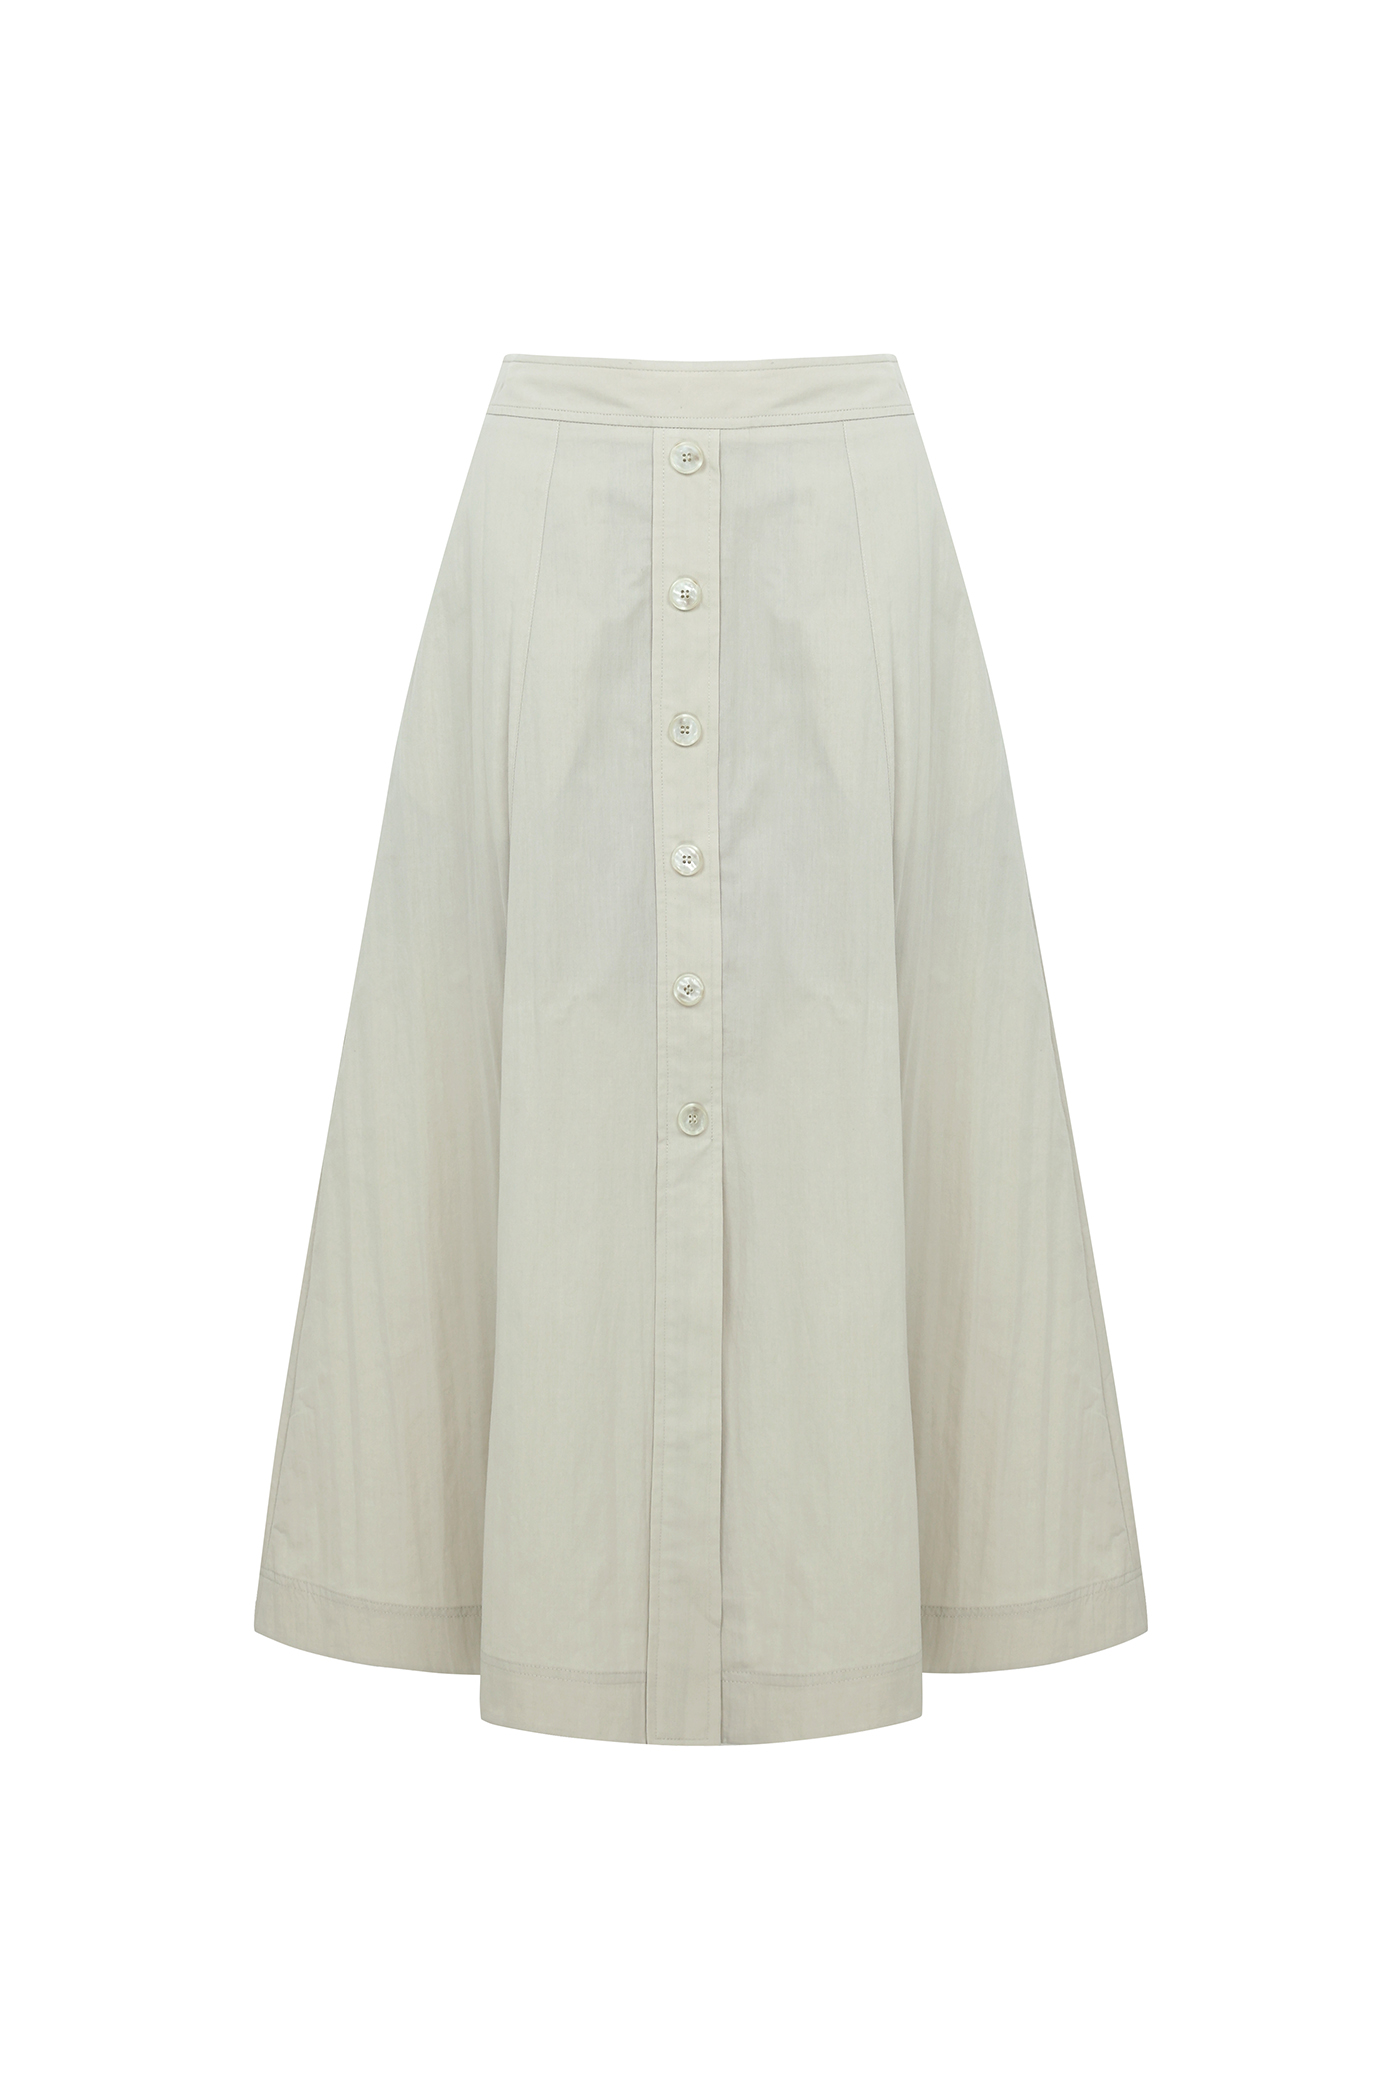 Flare Button Skirt[LMBCSUSK401]-2color